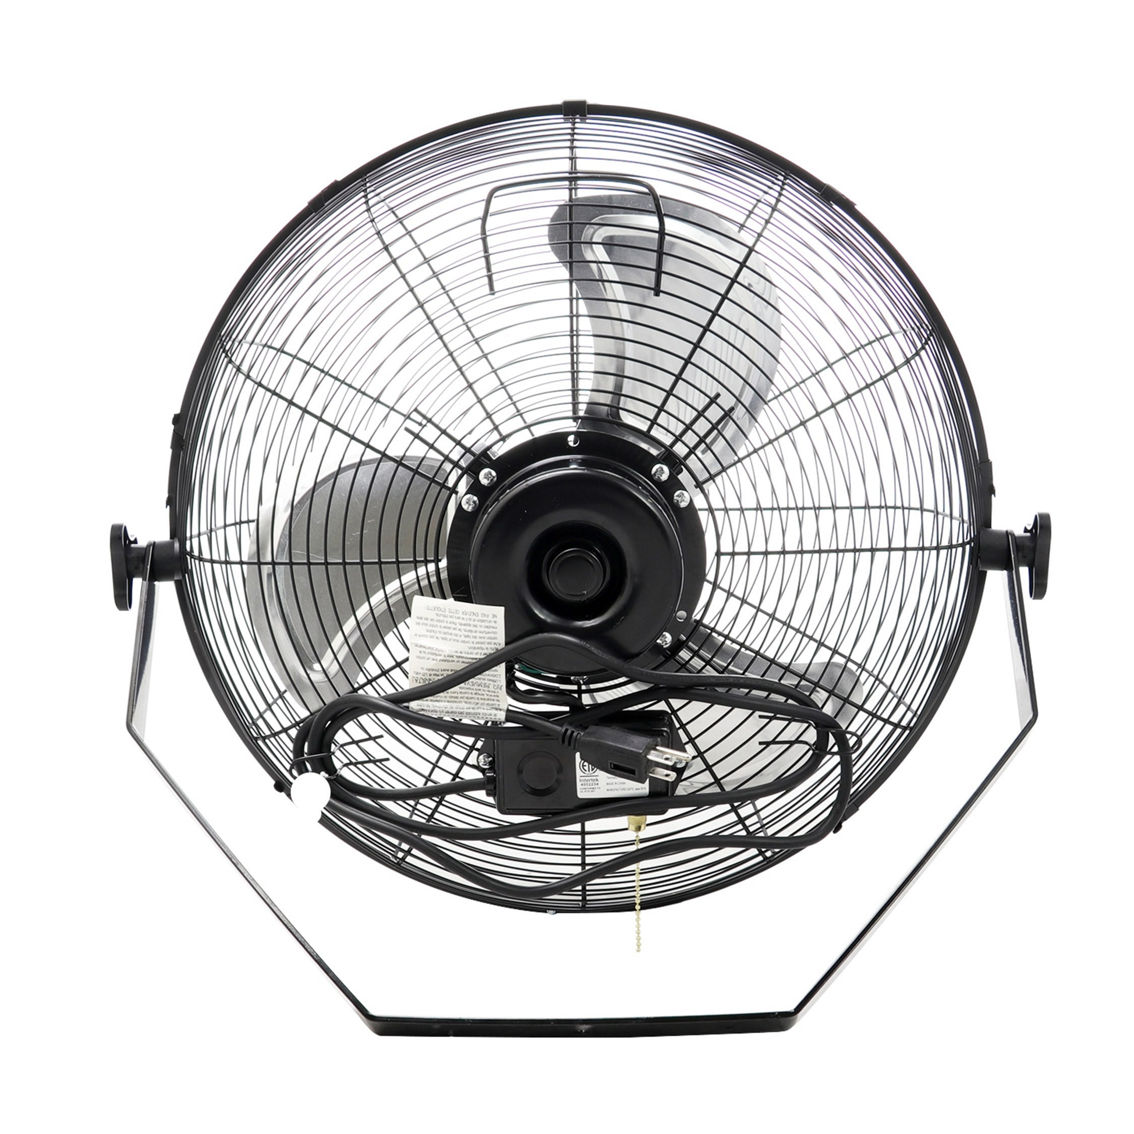 Vie Air Dual Function 18 Inch Wall Mountable Tilting Fan with 3 Speed Motor in B - Image 2 of 5